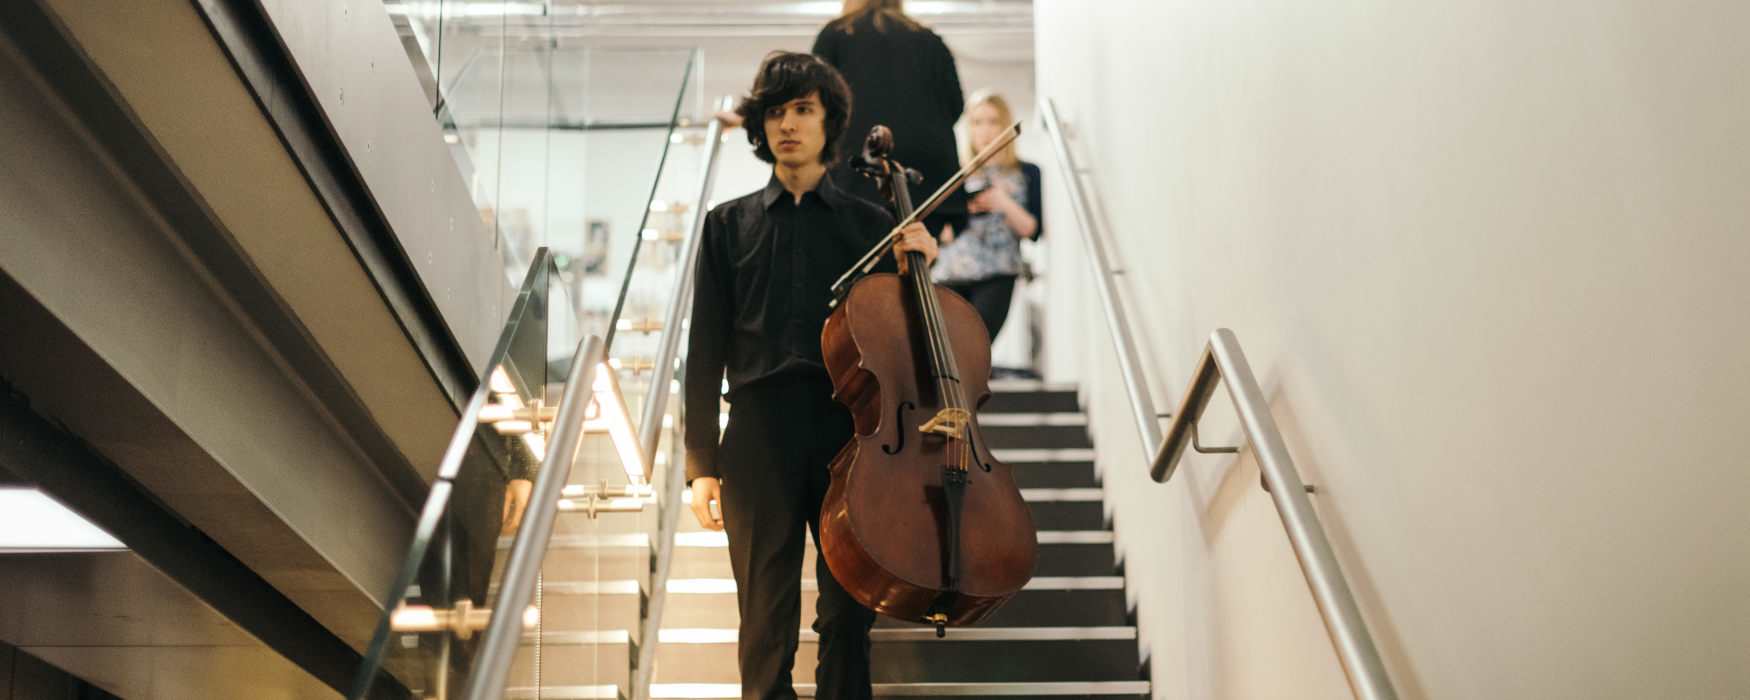 Man walking down stairs with a string instrument